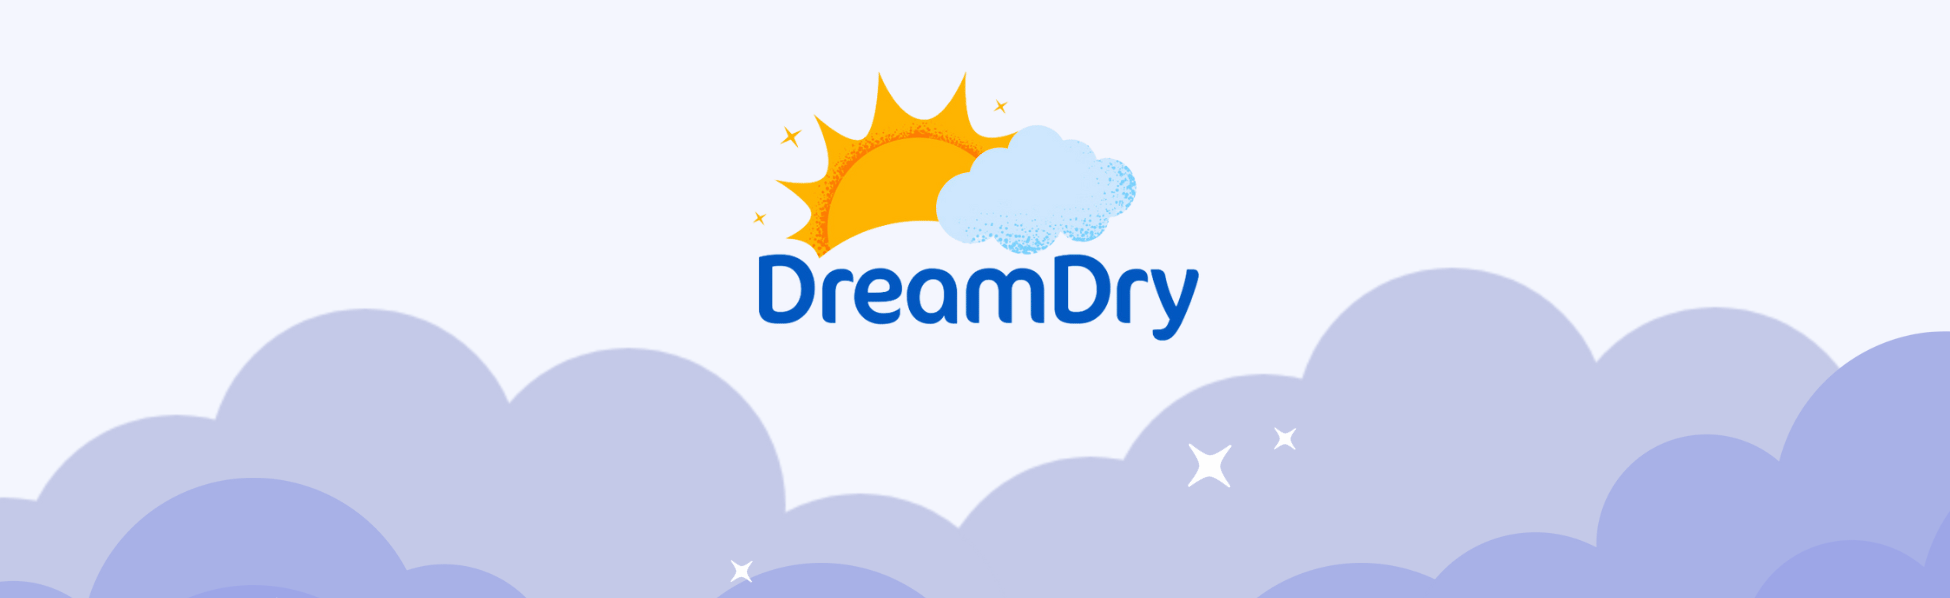 A landscape image of a lilac cloud graphic with the DreamDry, BBUK, ALTURiX and ERIC logos on.